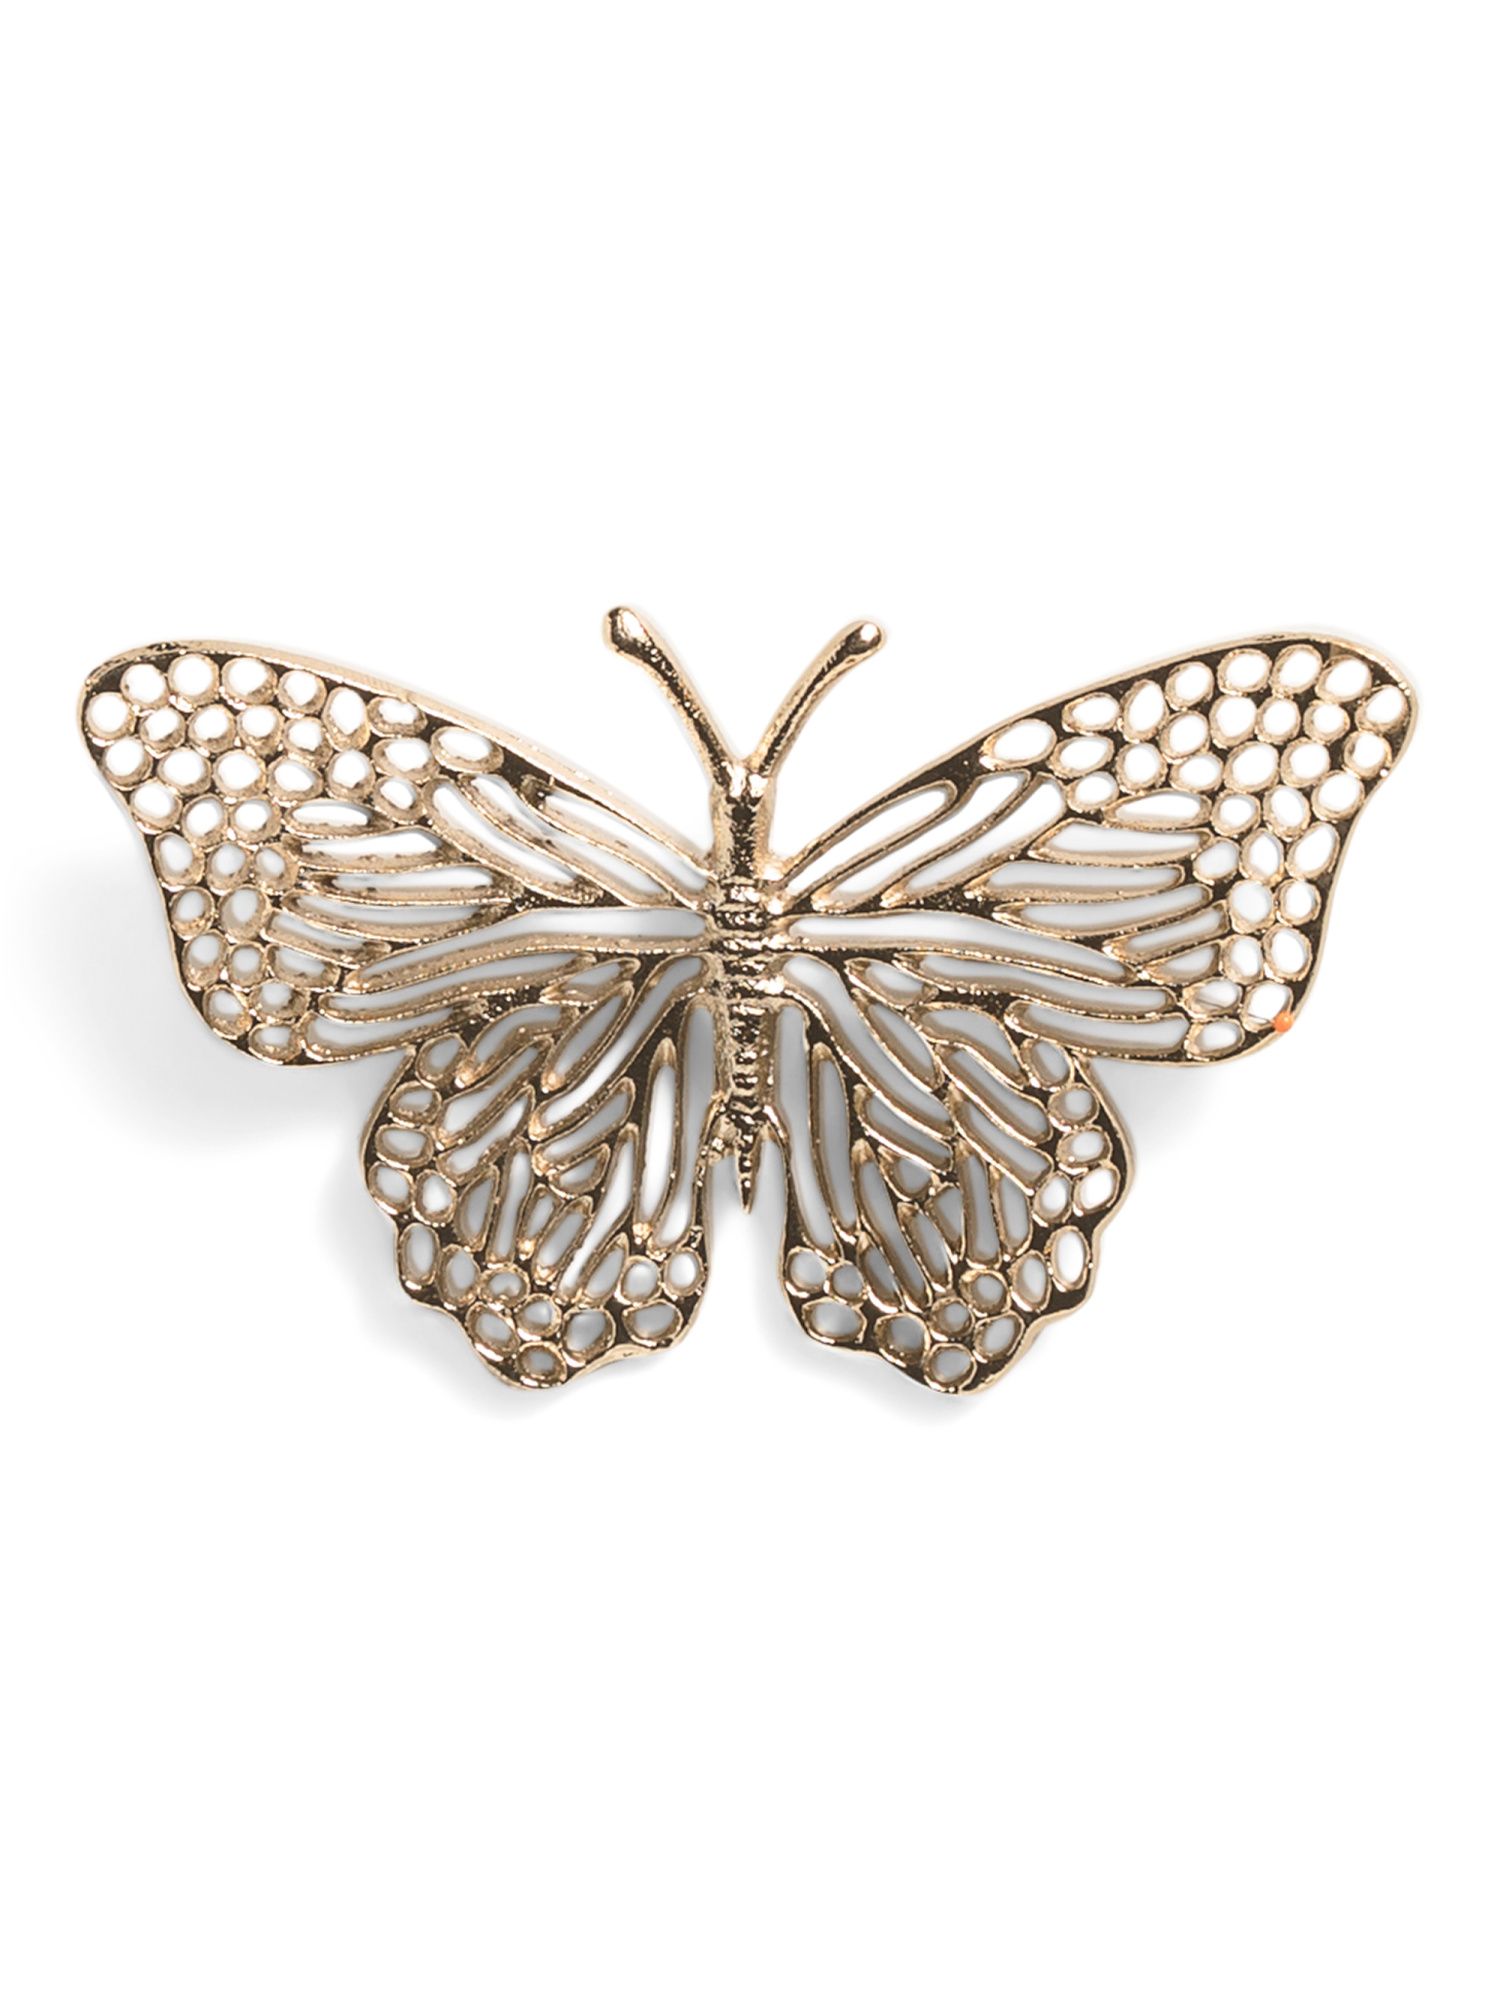 11in Metal Butterfly Wall Hanging Decor | TJ Maxx